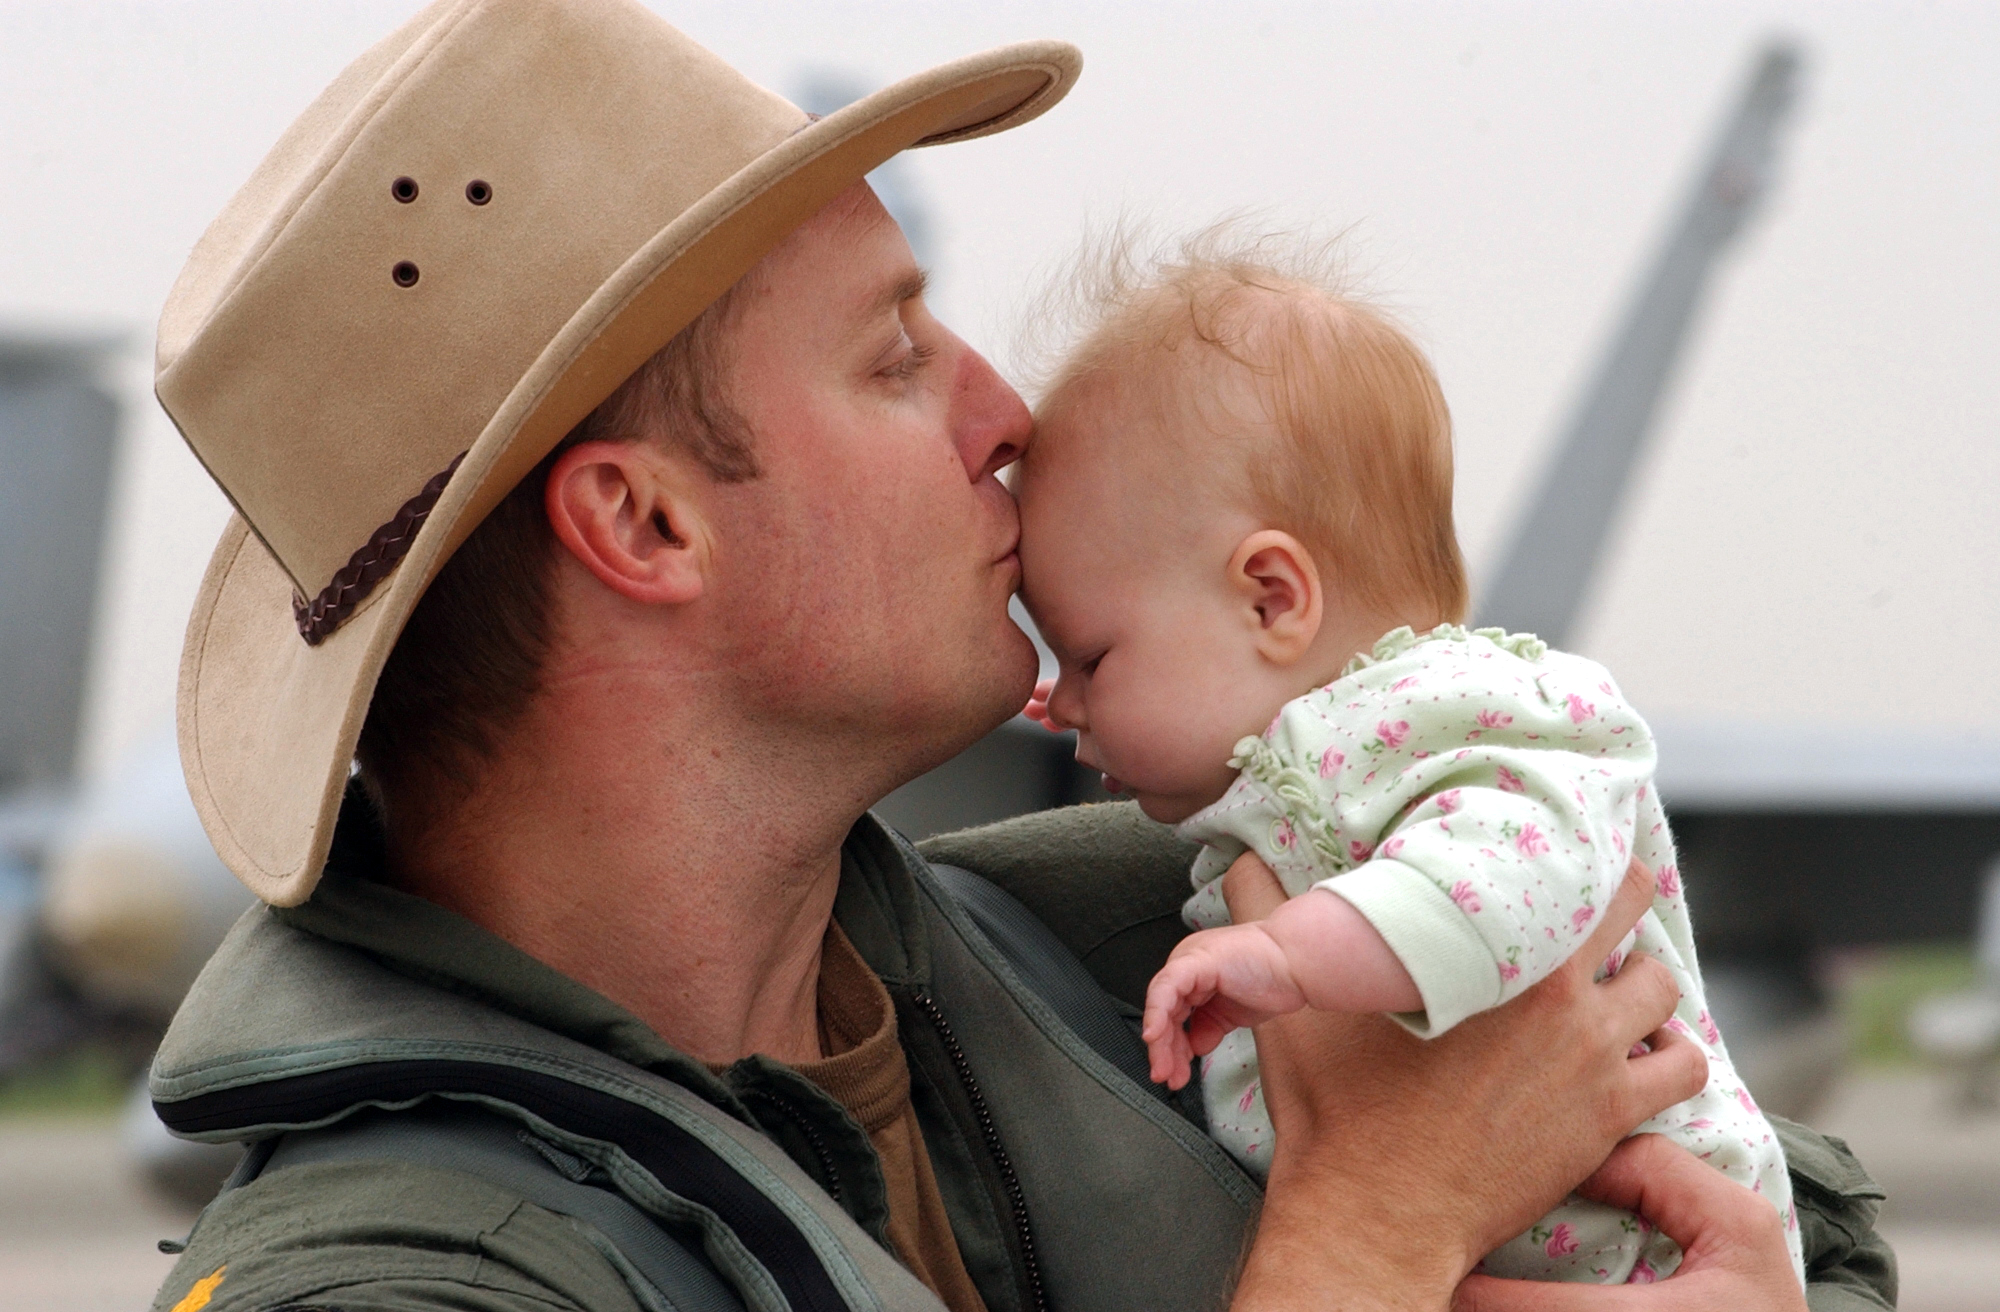 US Navy 040522-N-0435H-001 Lt. Cmdr Sean Cushing kisses his daughter after his return from a deployment